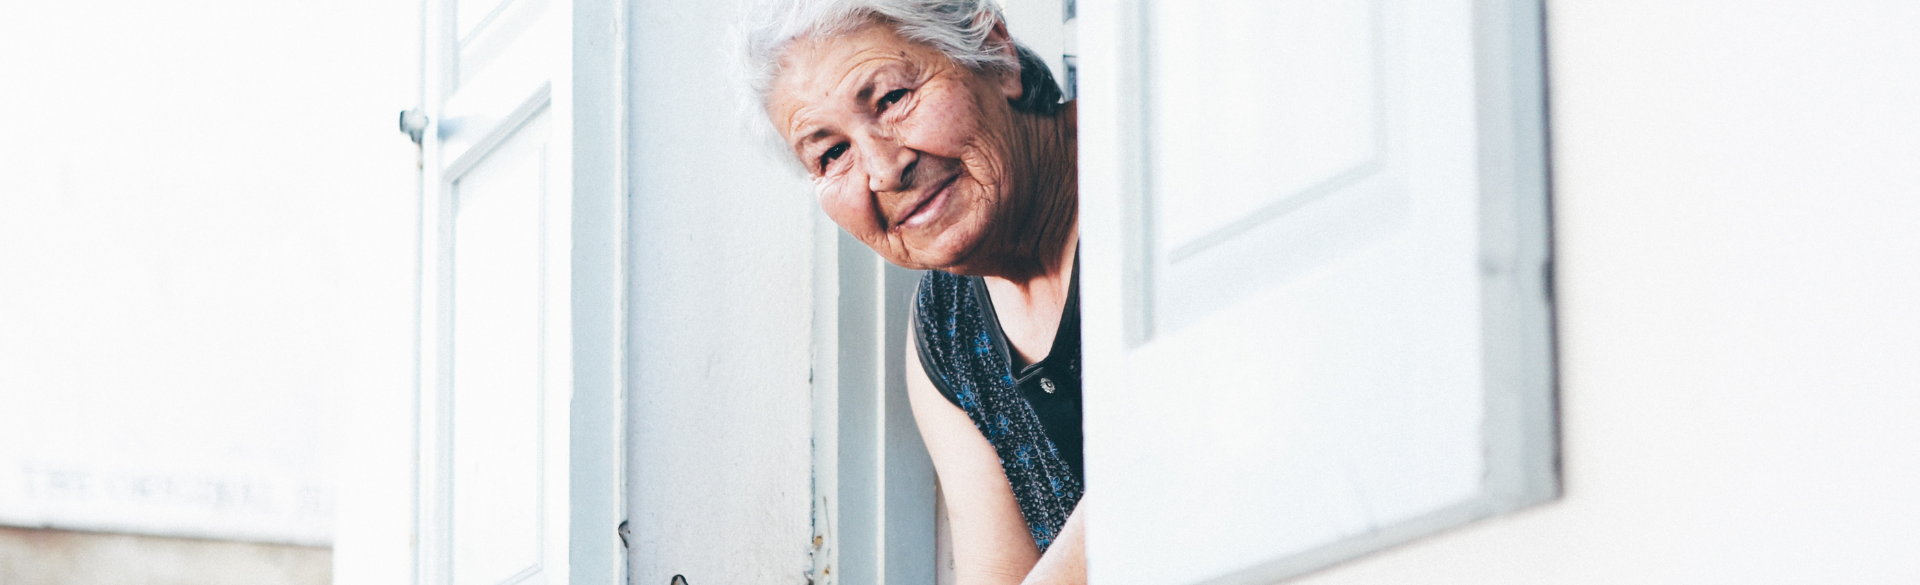 Woman leaning out window smiling